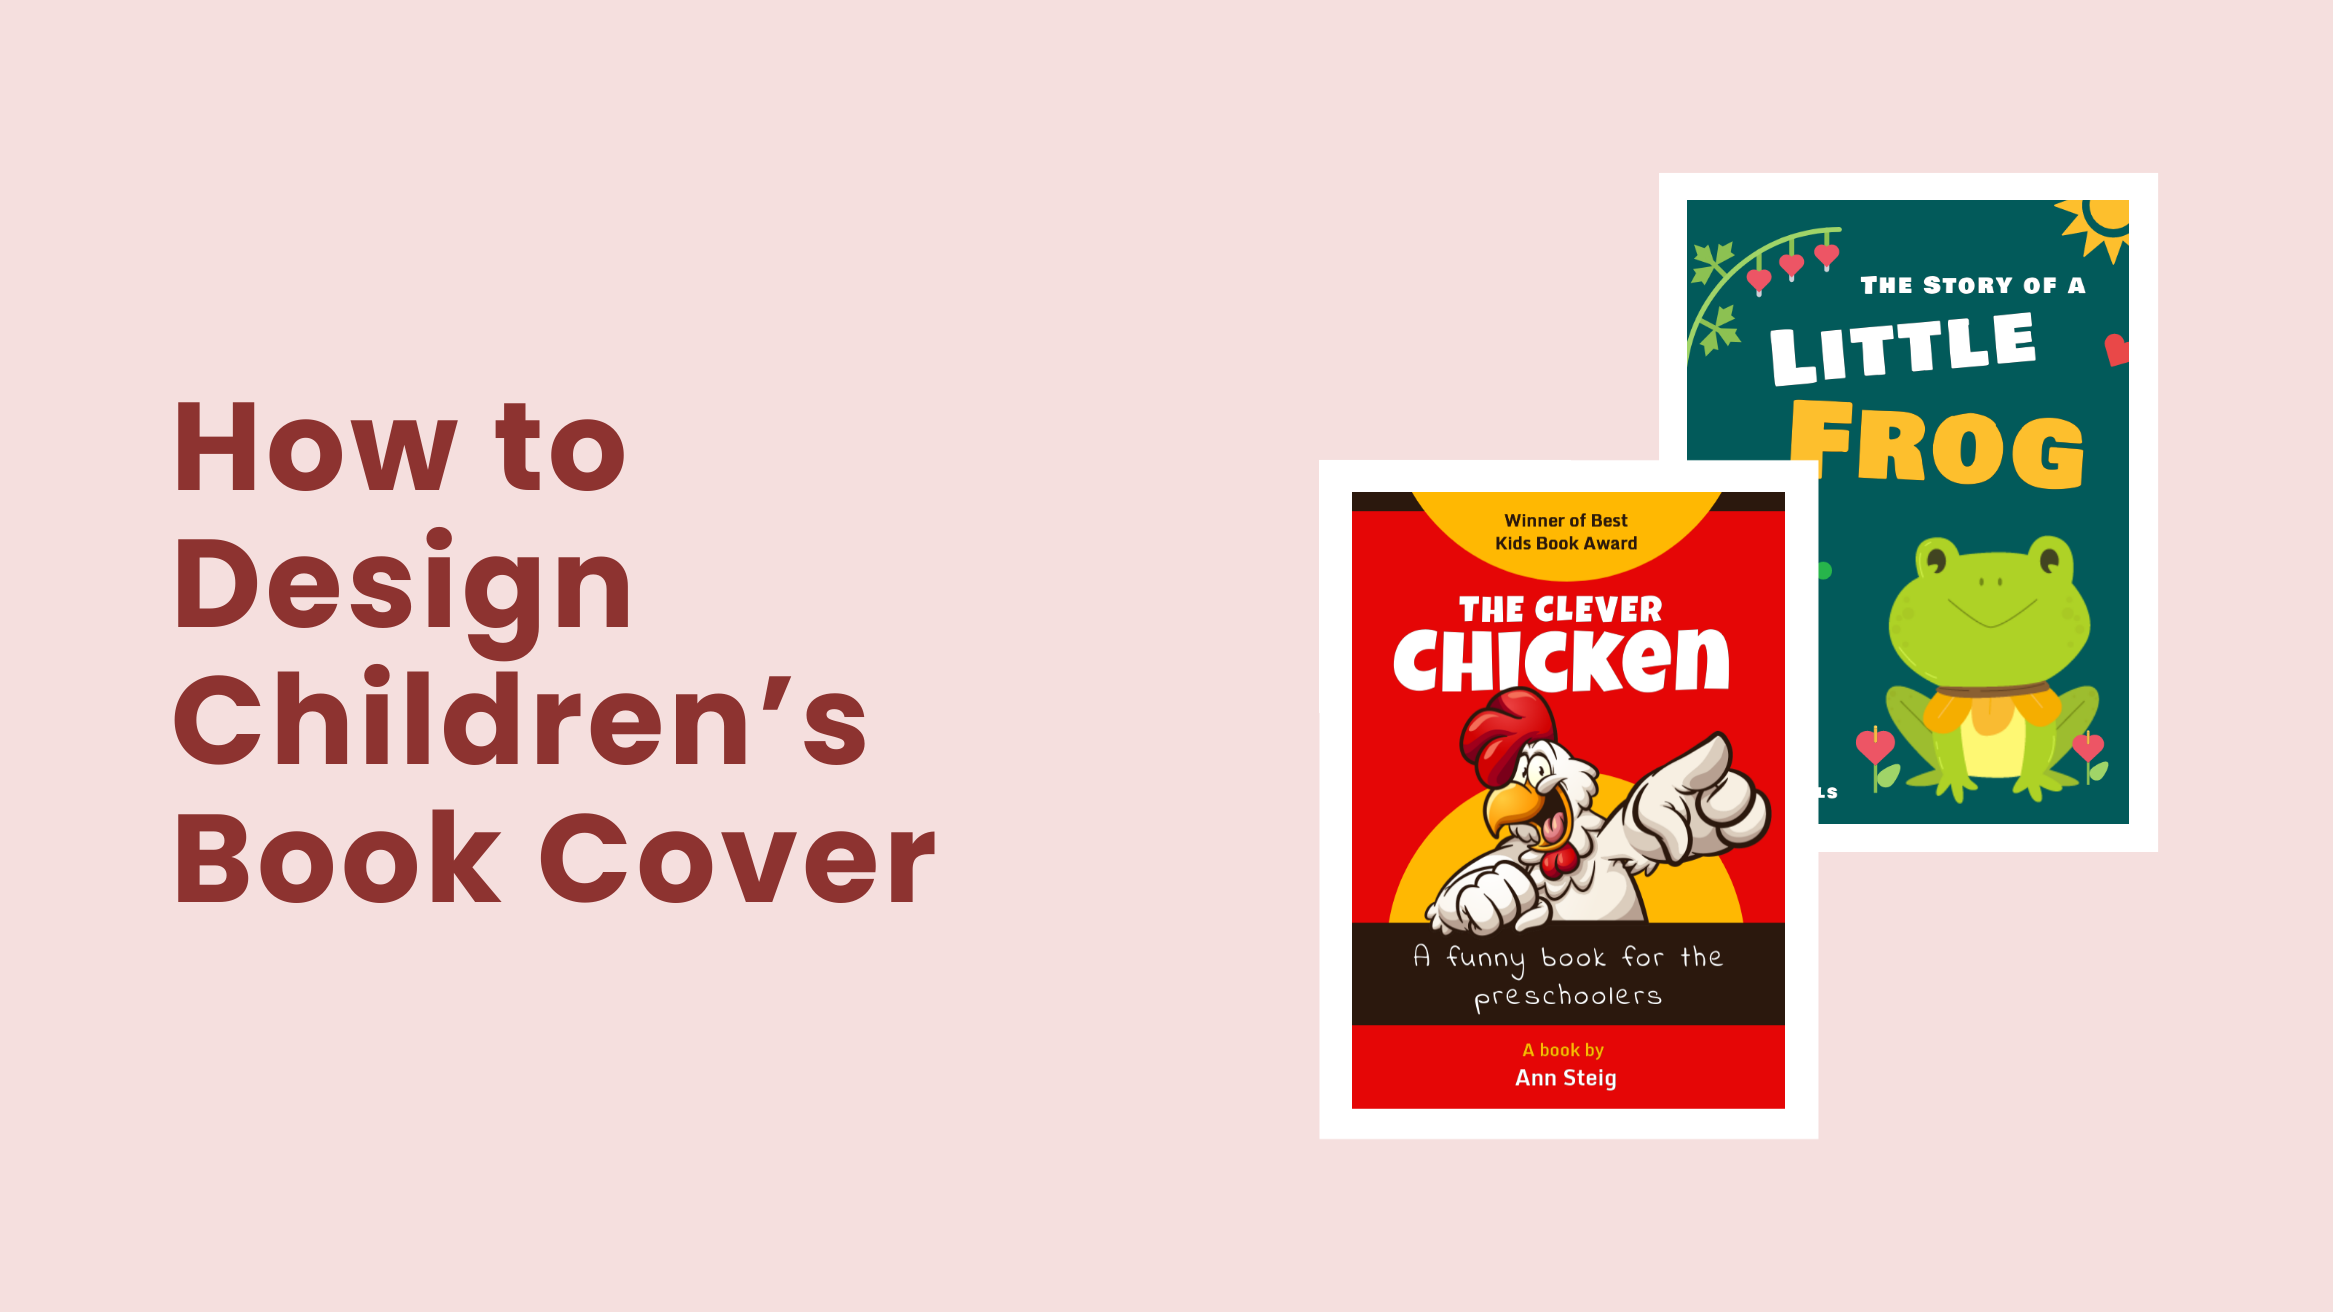 How to Design Childrens Book Cover